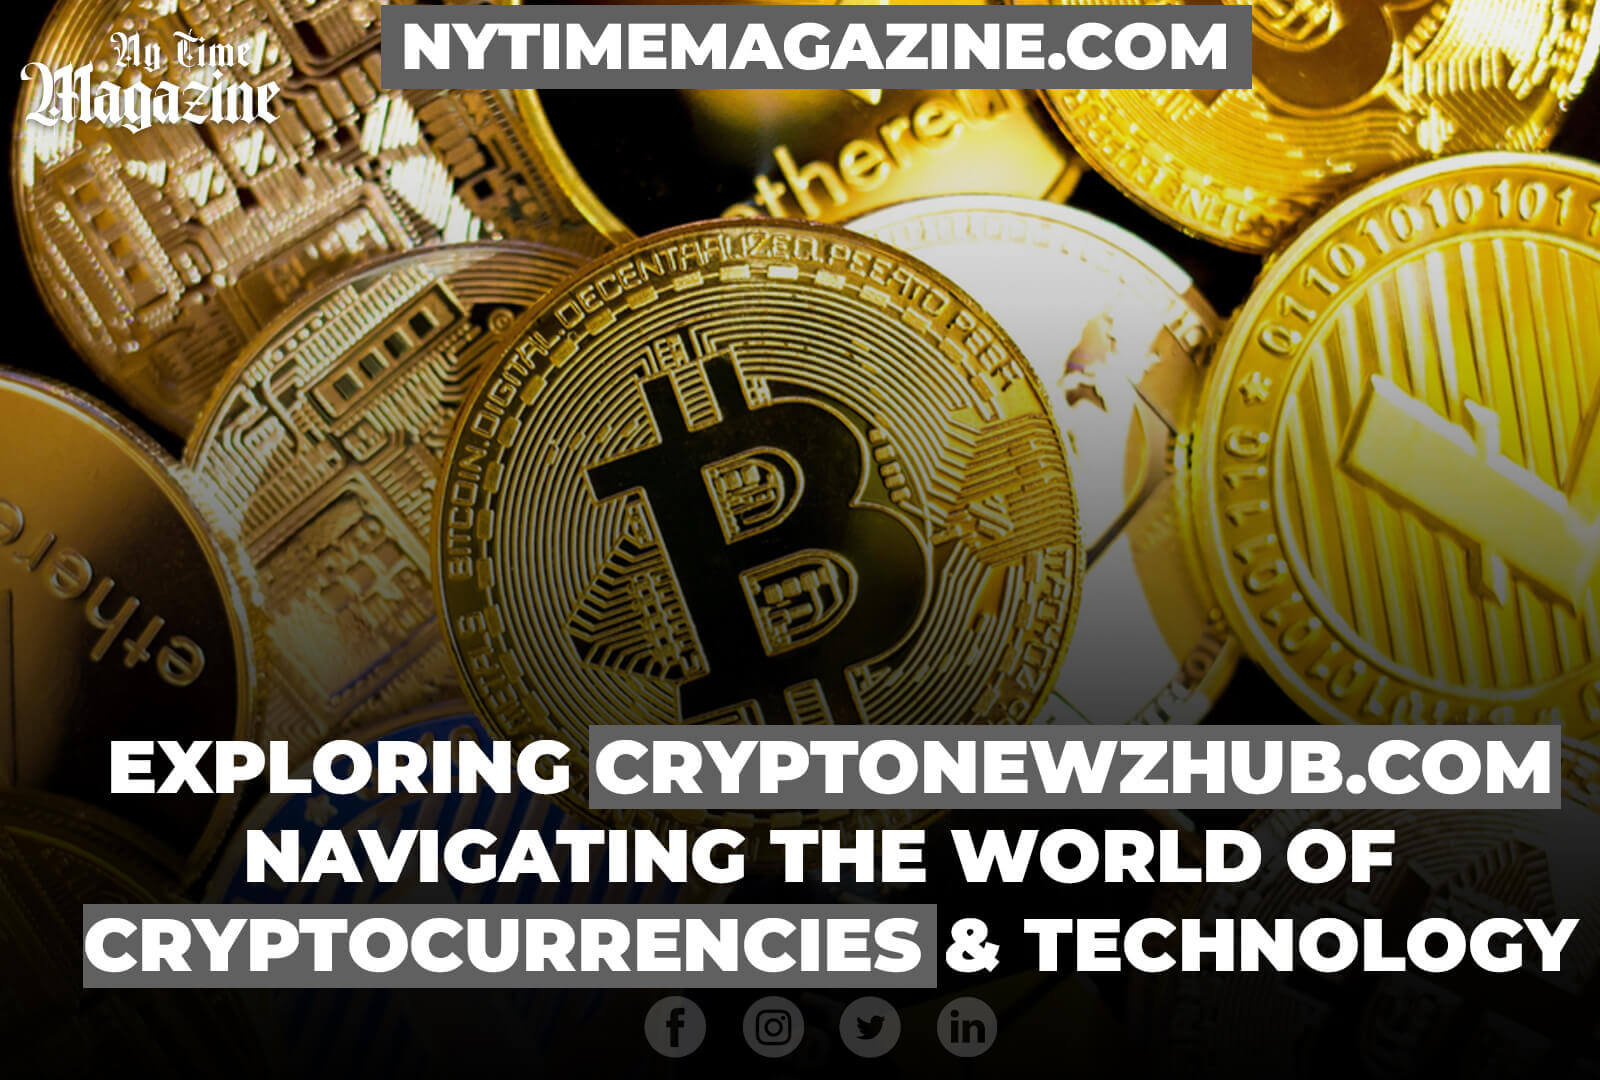 EXPLORING CRYPTONEWZHUB.COM: NAVIGATING THE WORLD OF CRYPTOCURRENCIES AND TECHNOLOGY